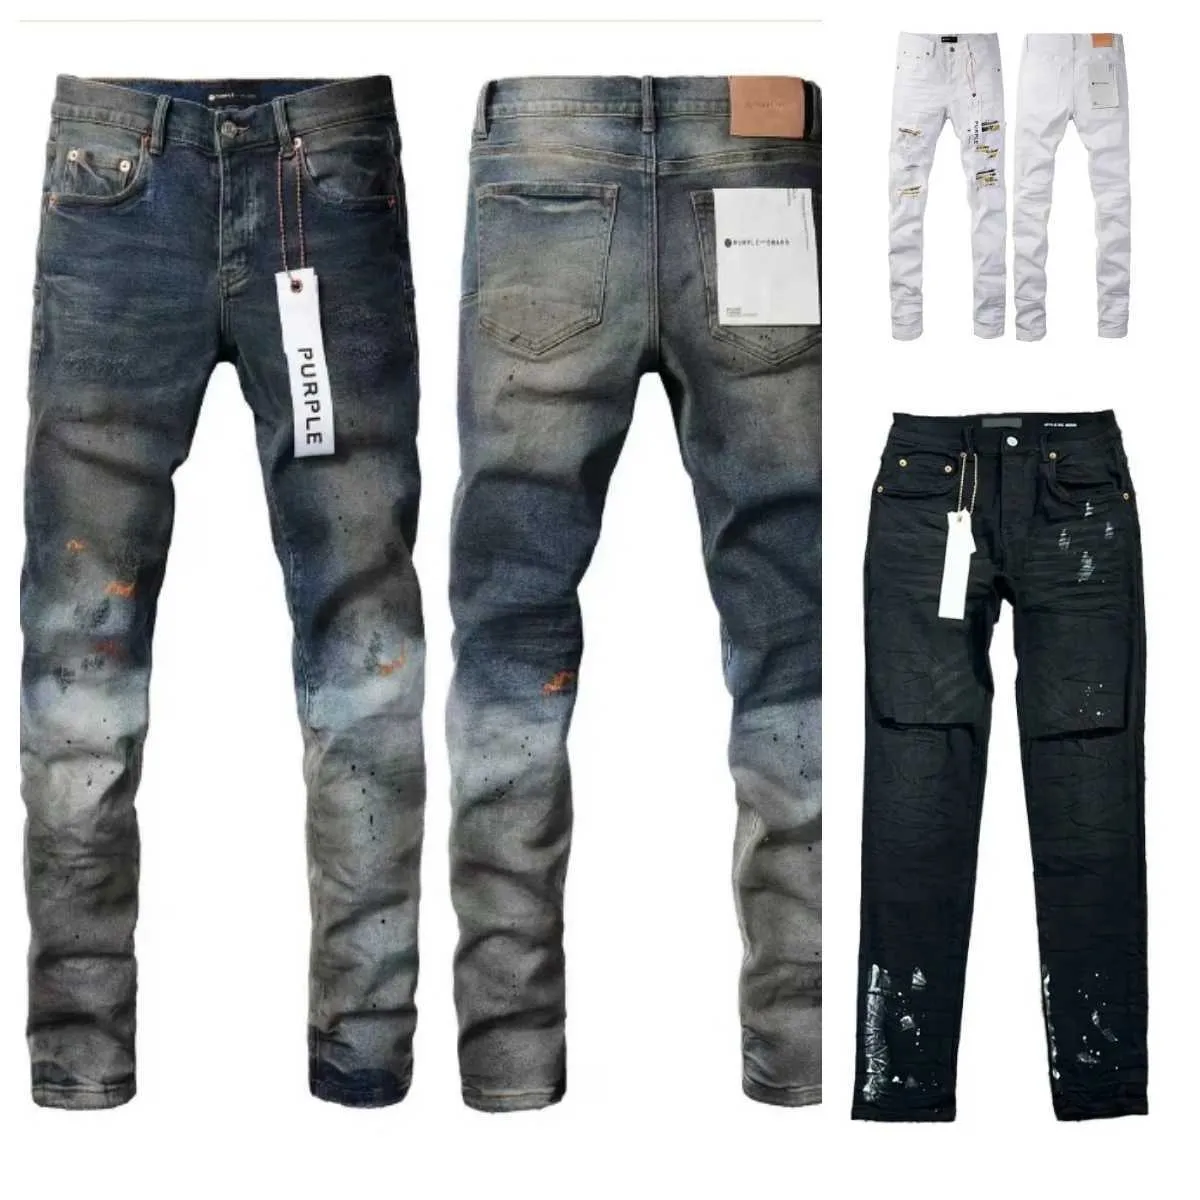 Mens Purple Designer Jeans Hole Skinny Motorcycle Chic Ripped Patchwork Fashion High Street New Hip Hop Wash Made Oldj4pn